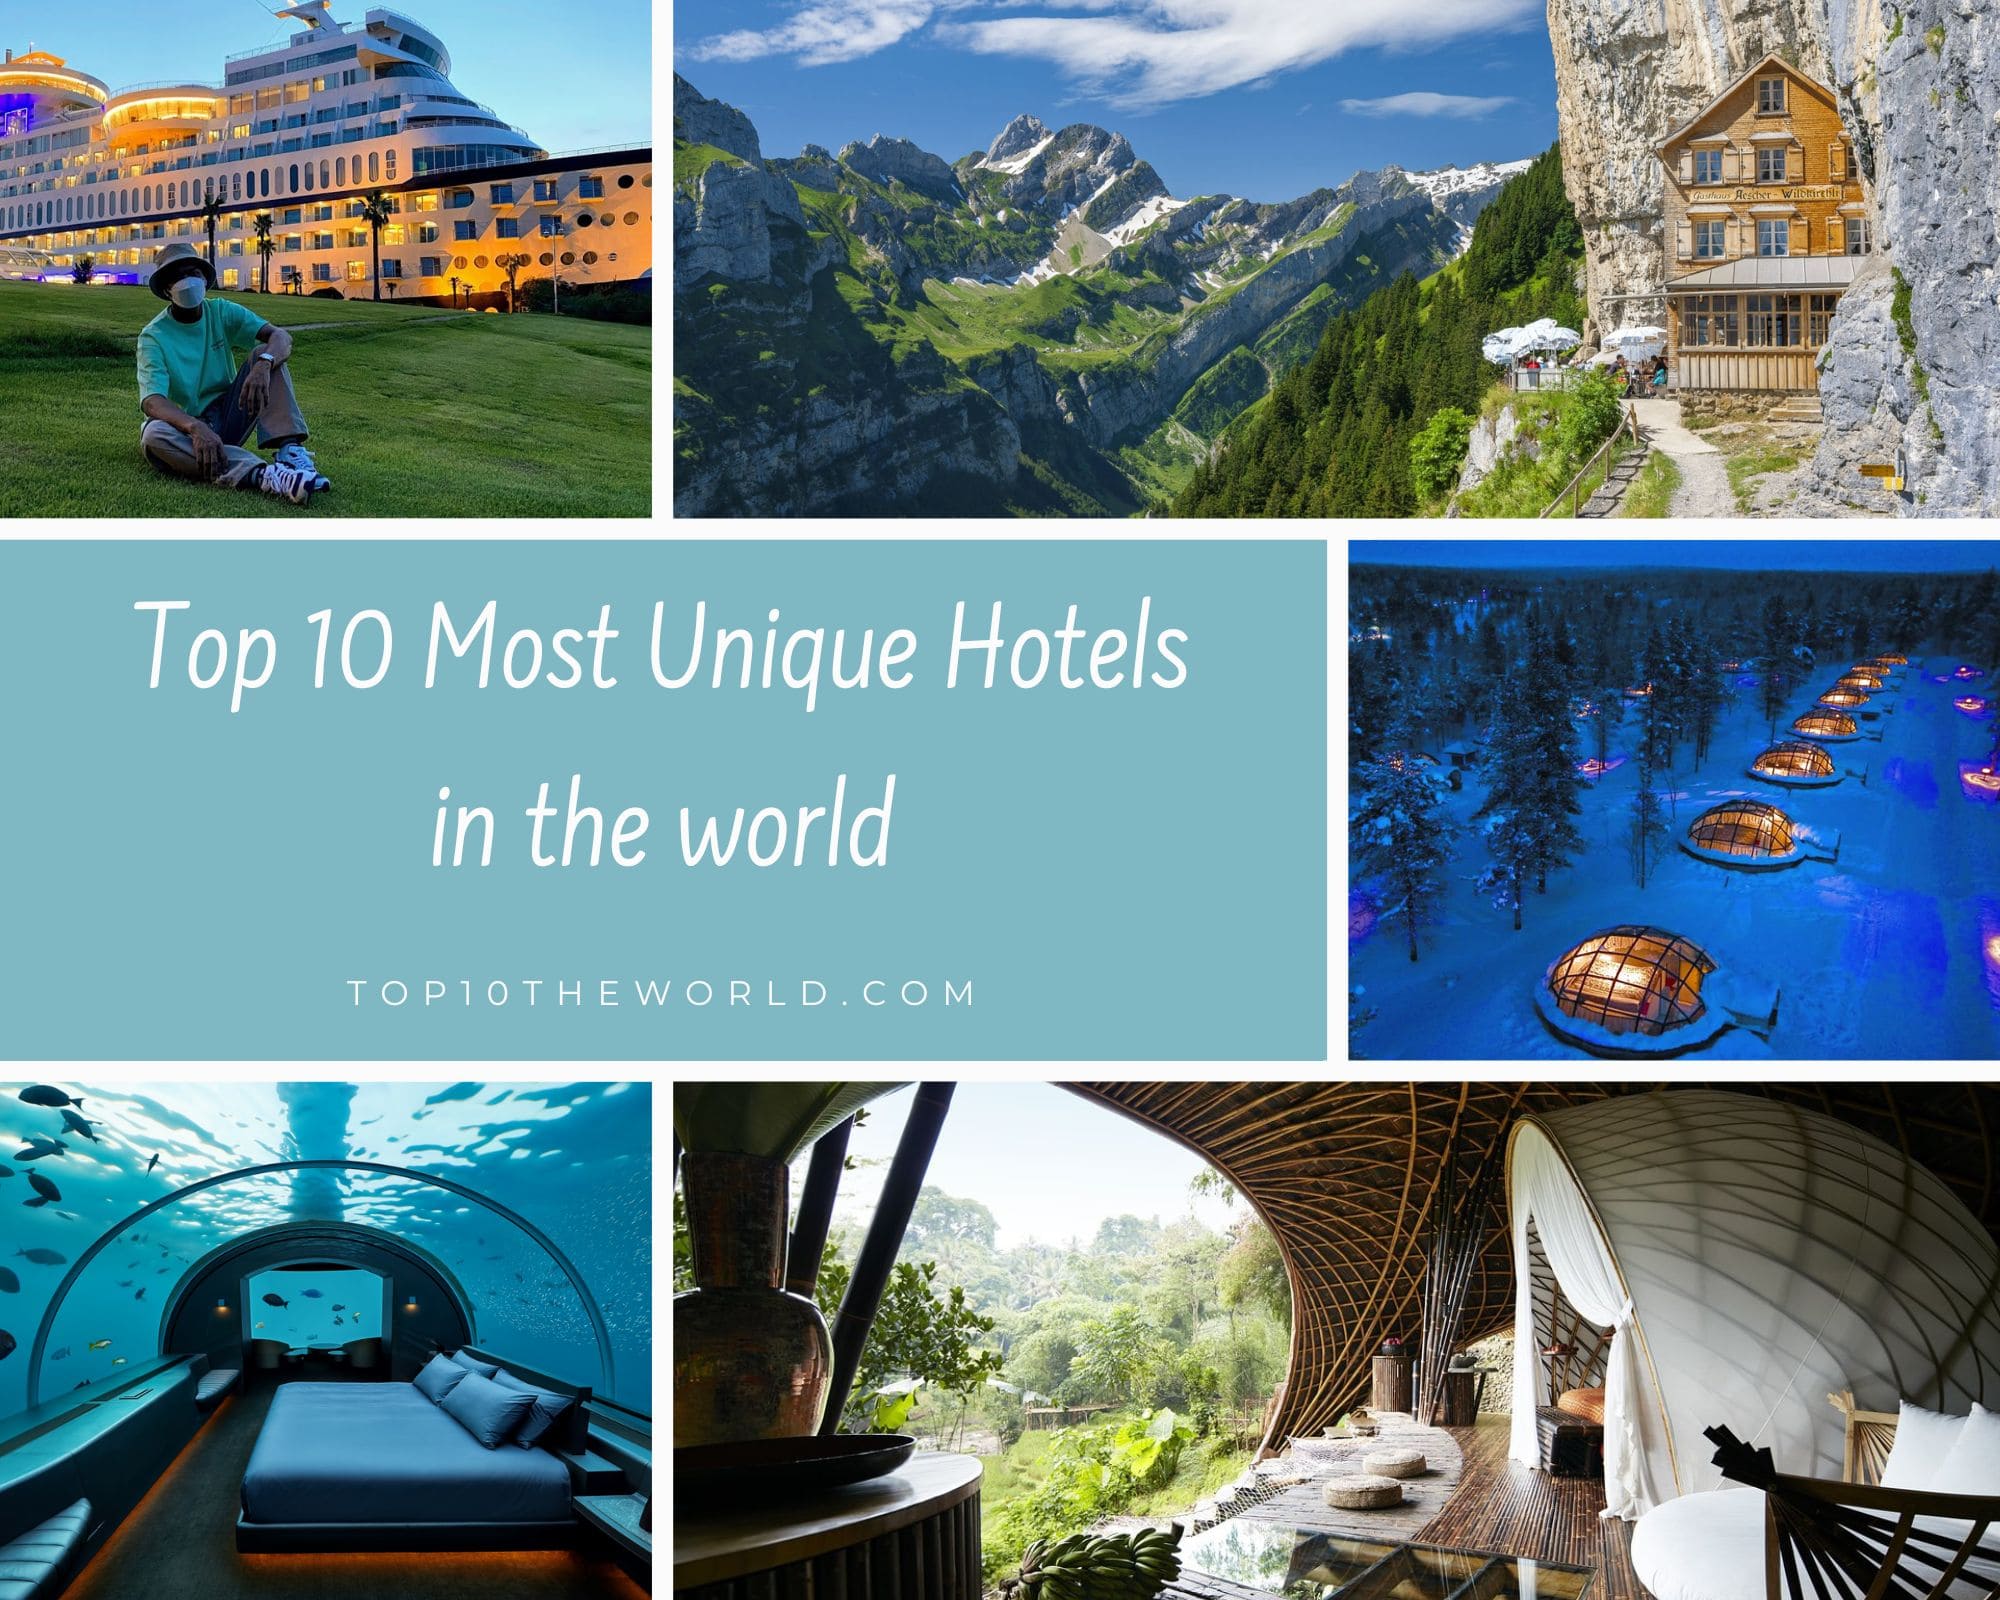 Top 10 Most Unique Hotels in the world